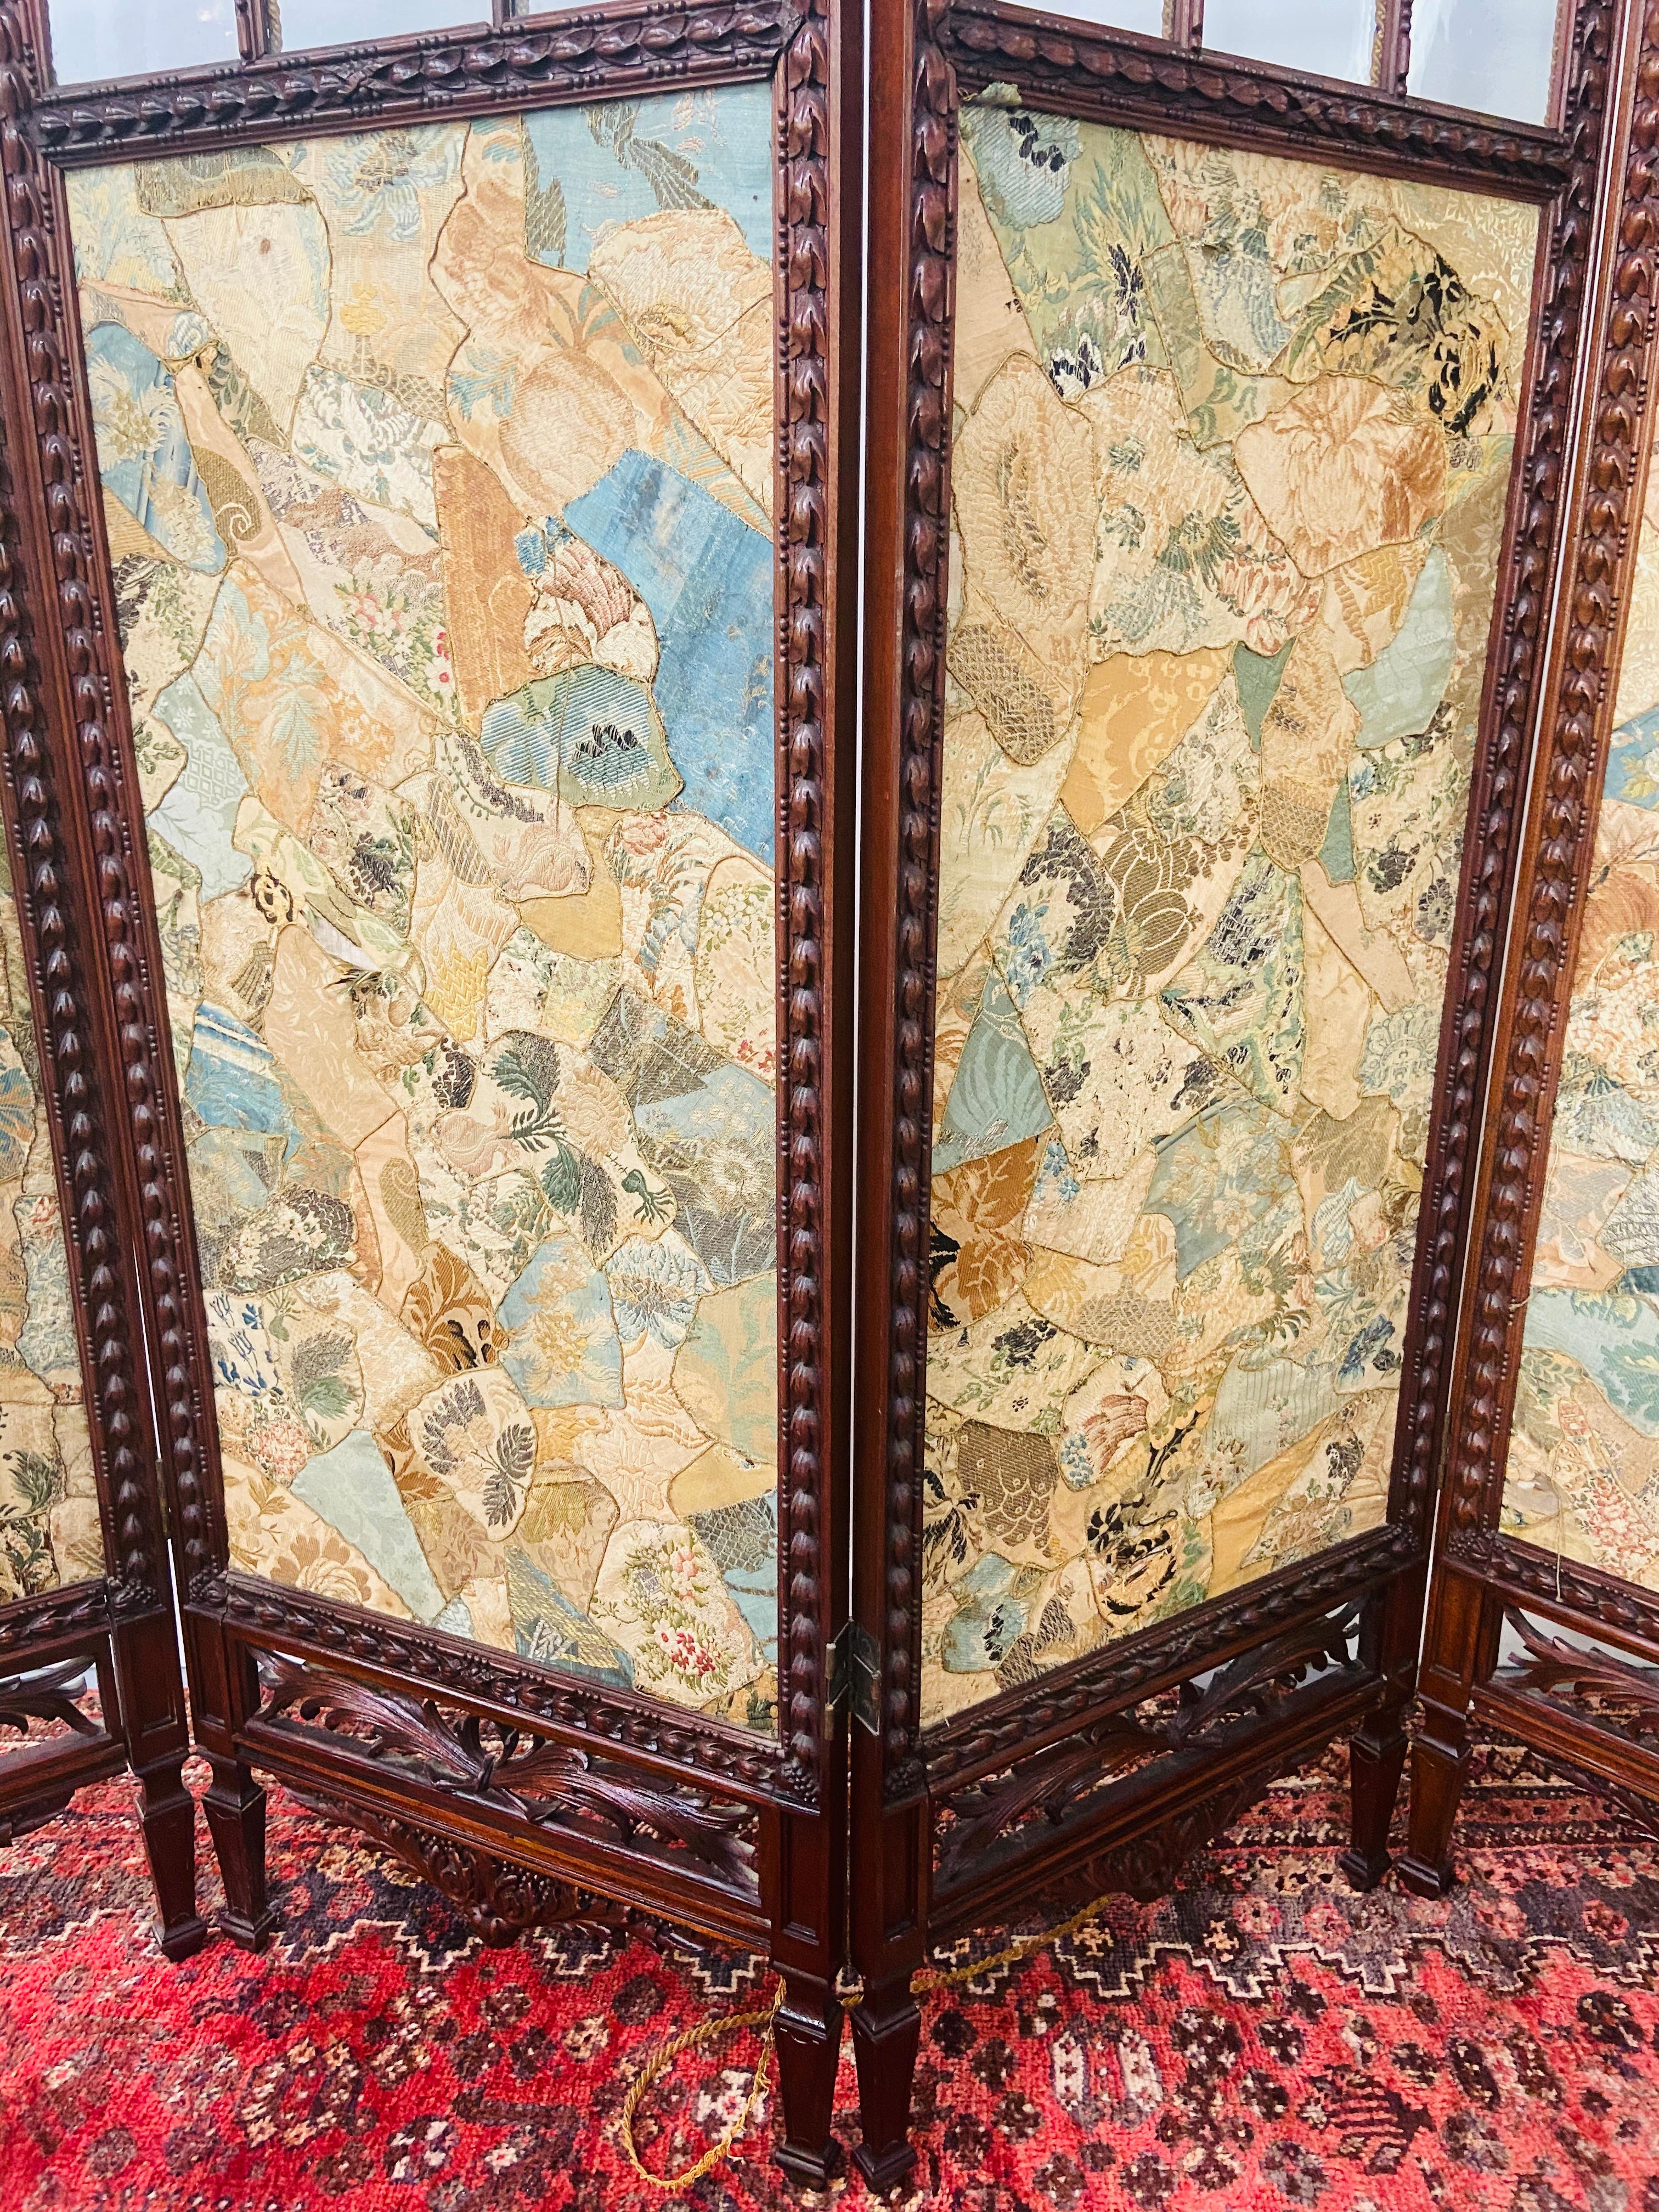 Victorian 19th Century English Carved Mahogany and Glass Four-Panel Room Divider or Screen